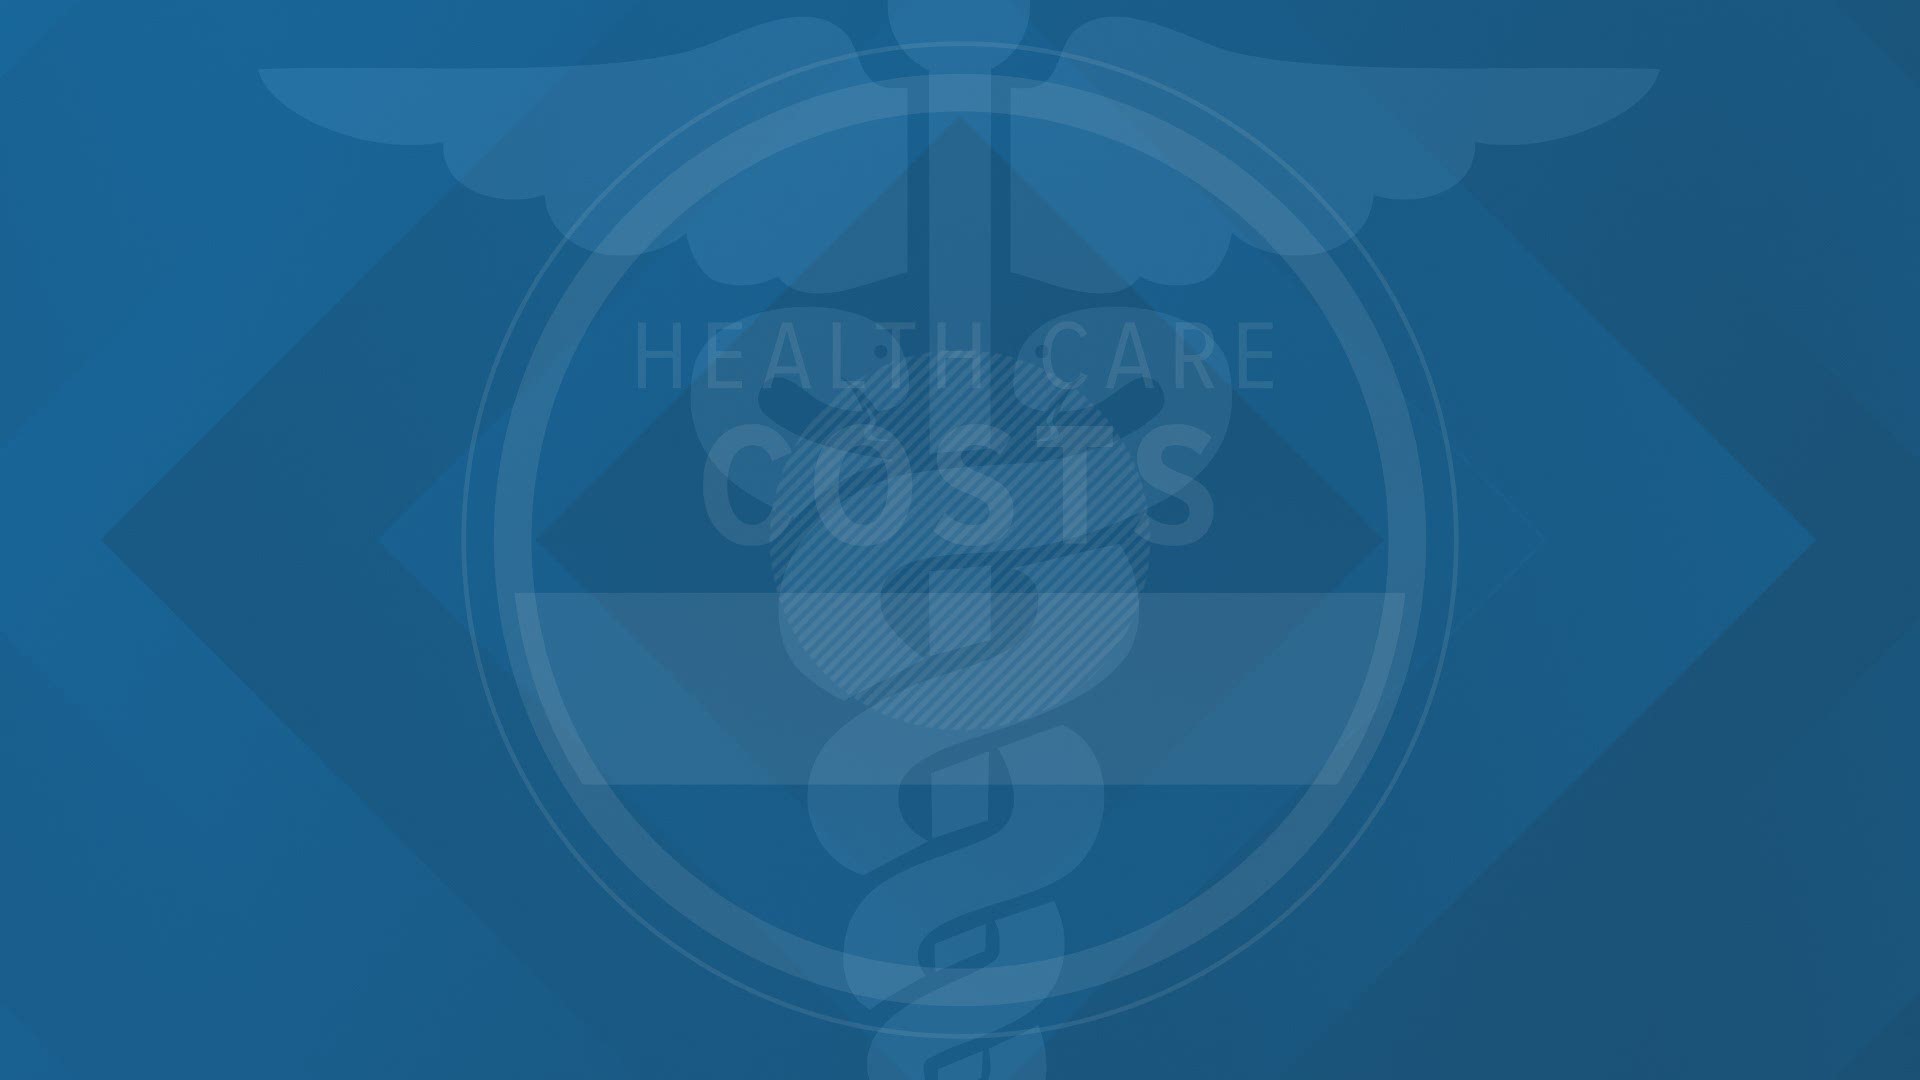 Tips for patients to save money on healthcare costs